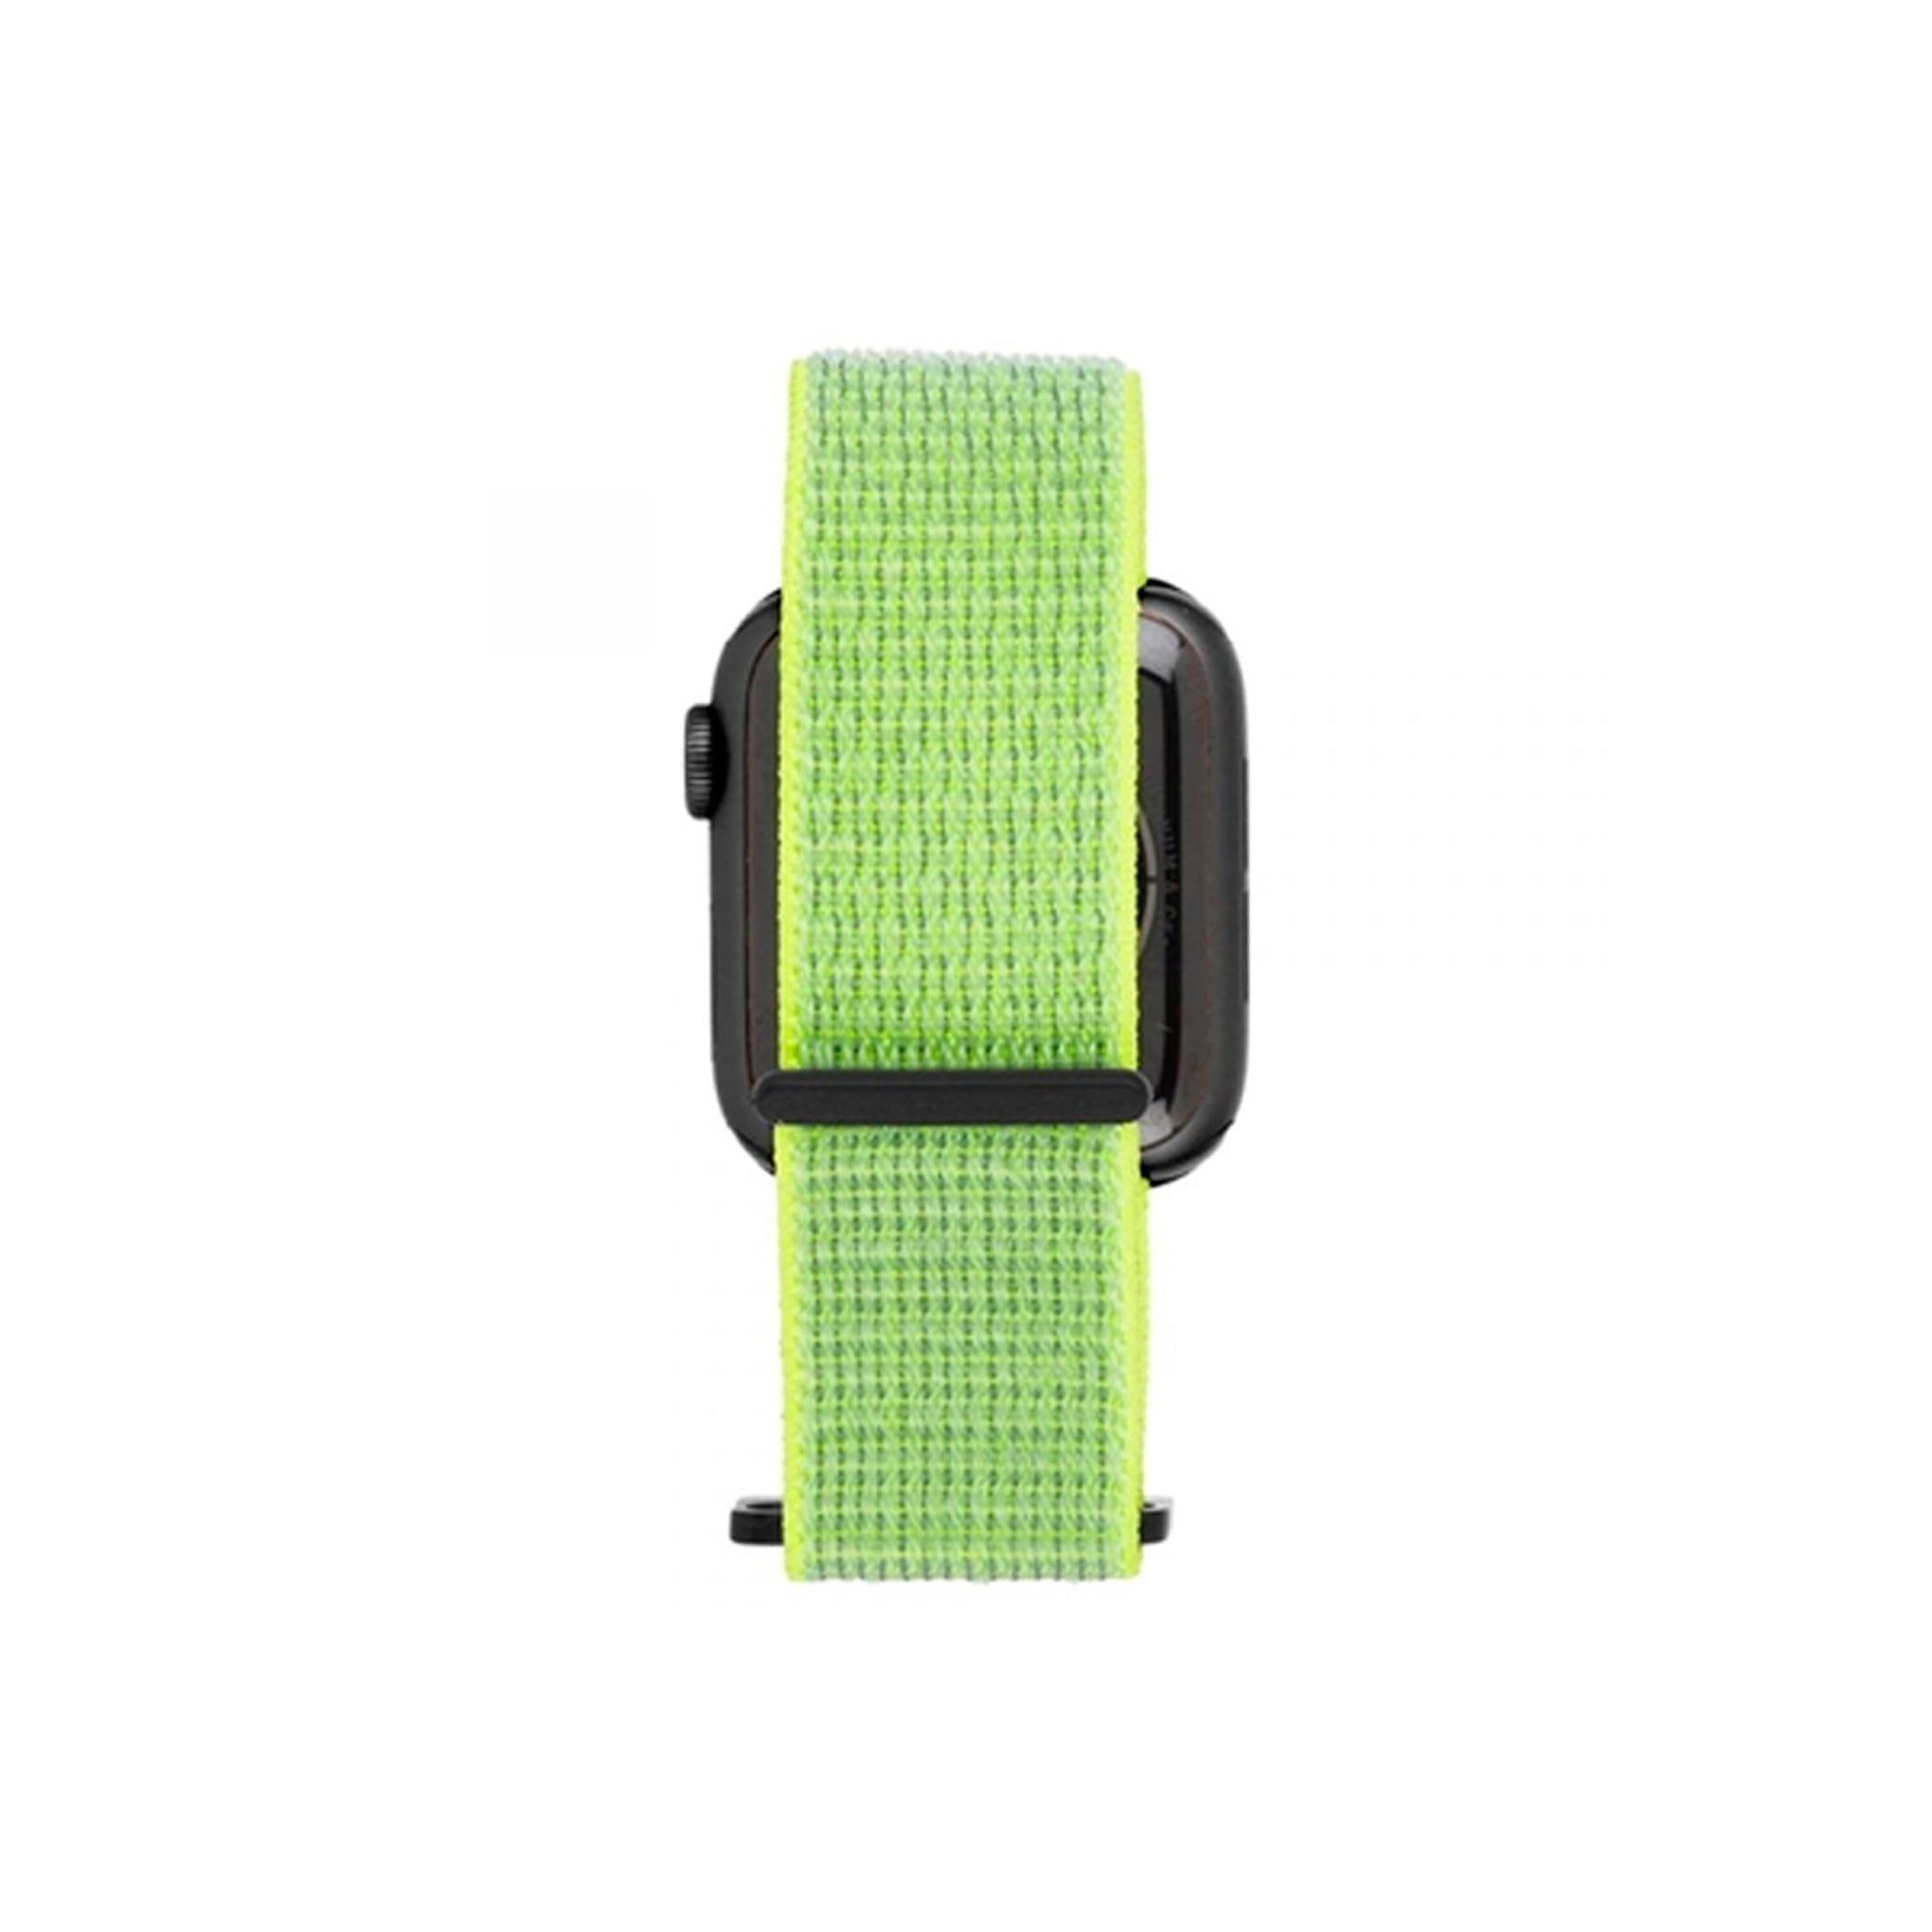 Case-mate - Nylon Watchband For Apple Watch 42mm / 44mm - Reflective Neon Green